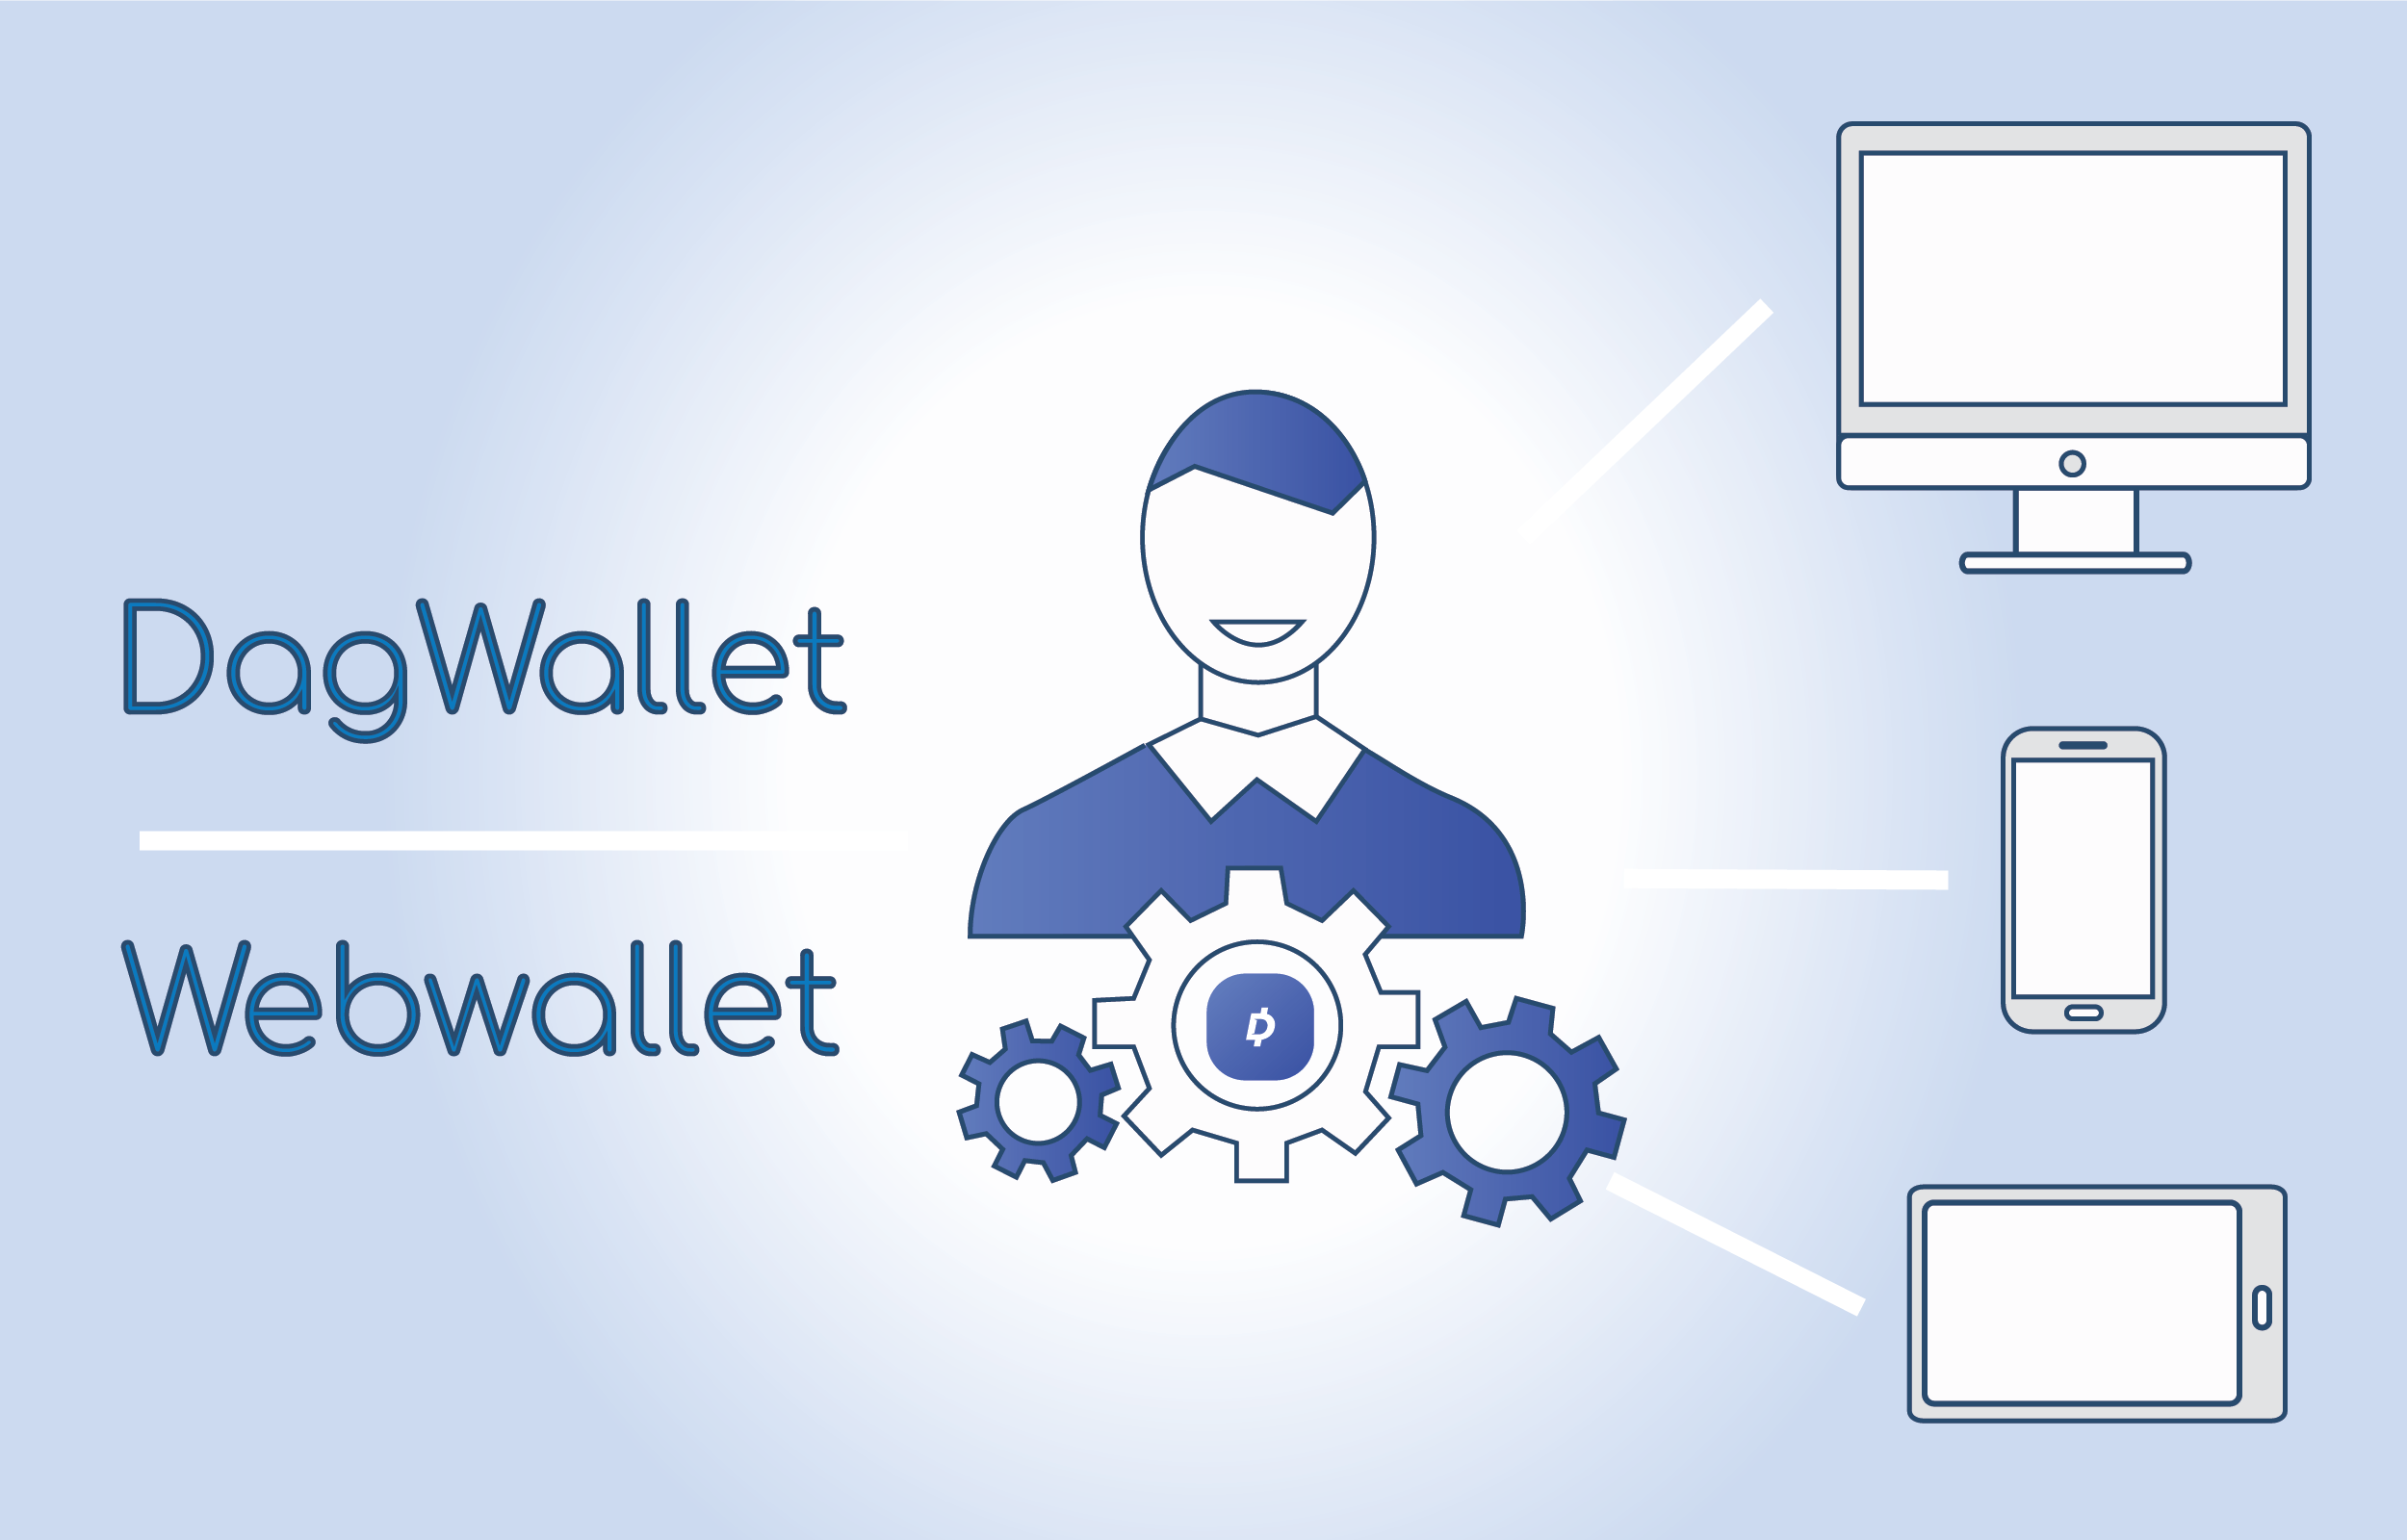 Let's talk about the DagWallet and webwallet